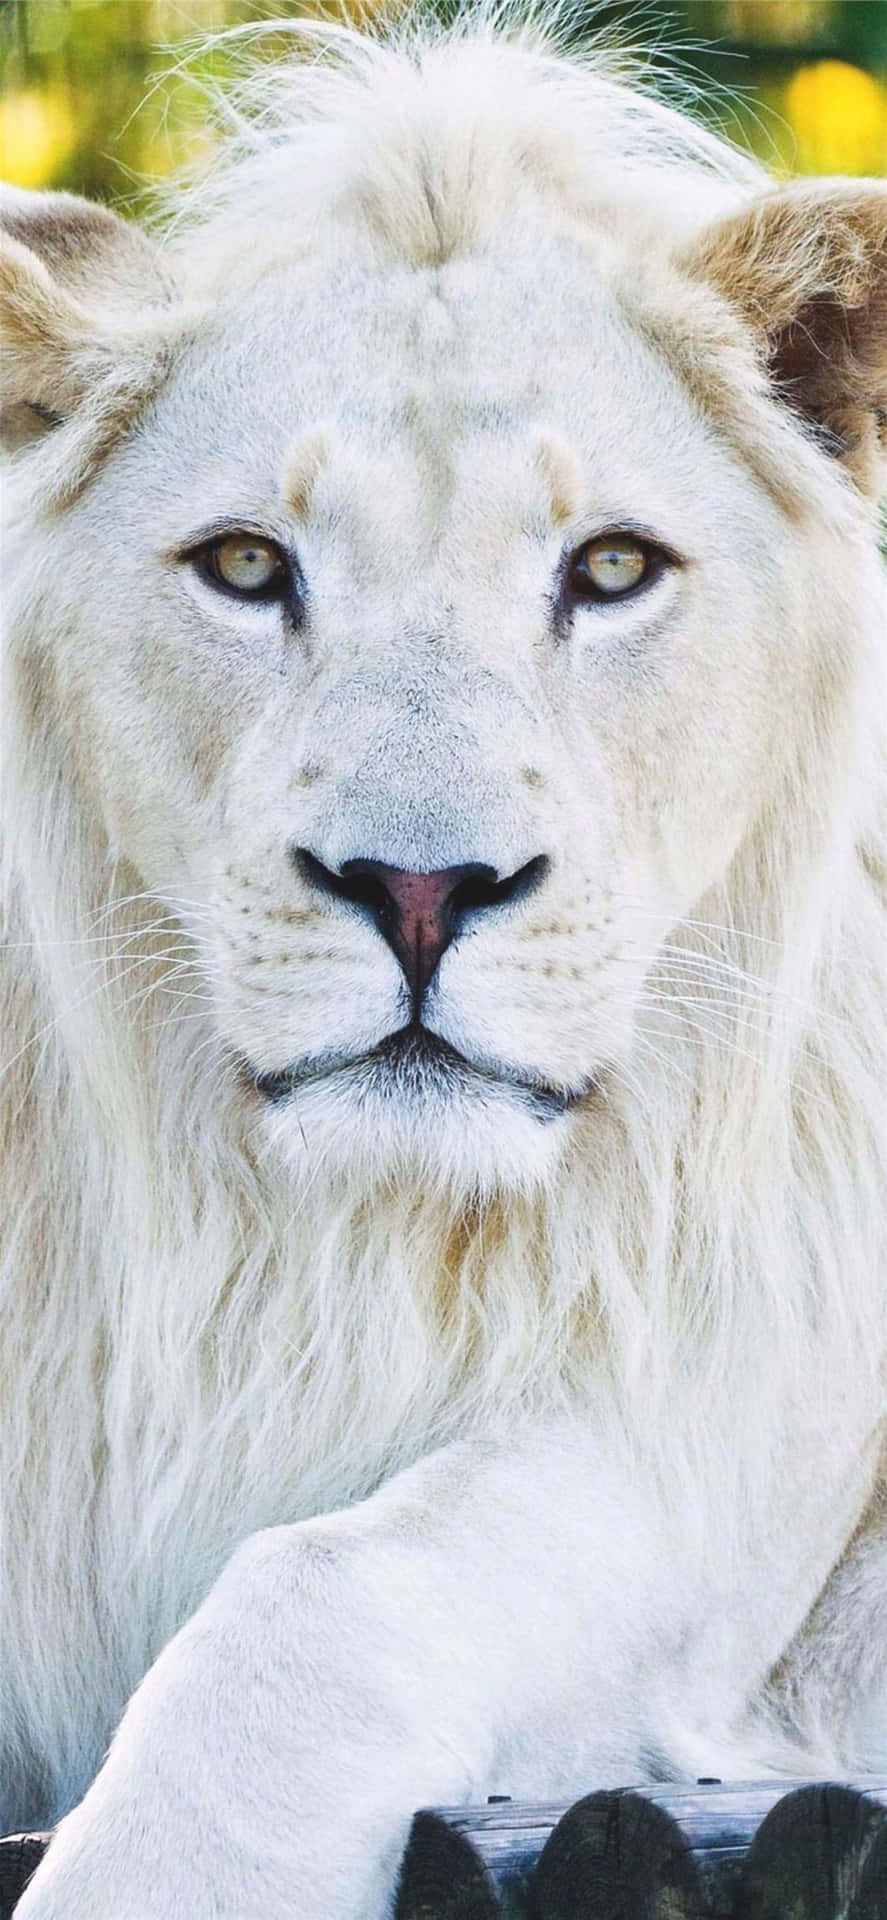 "Enhance your phone experience with this animals iPhone wallpapers" Wallpaper